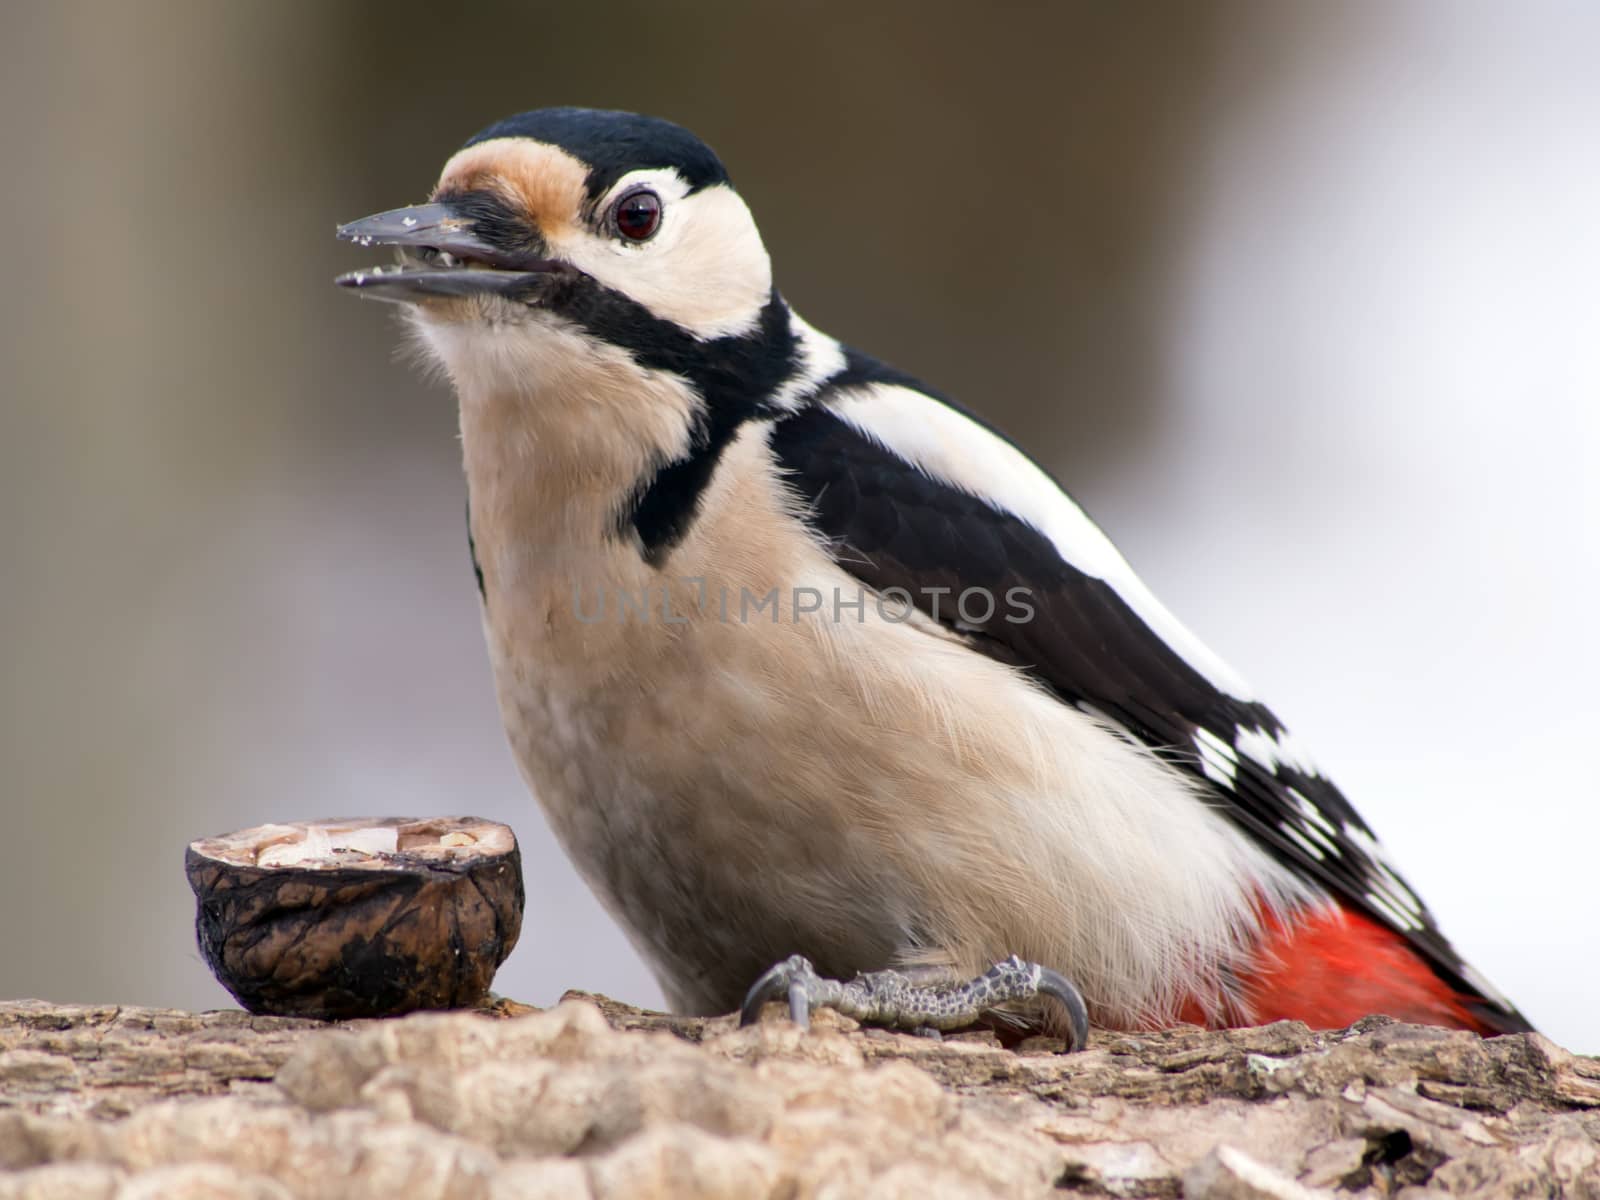 Great Spotted Woodpecker (Dendrocopos major) by dadalia